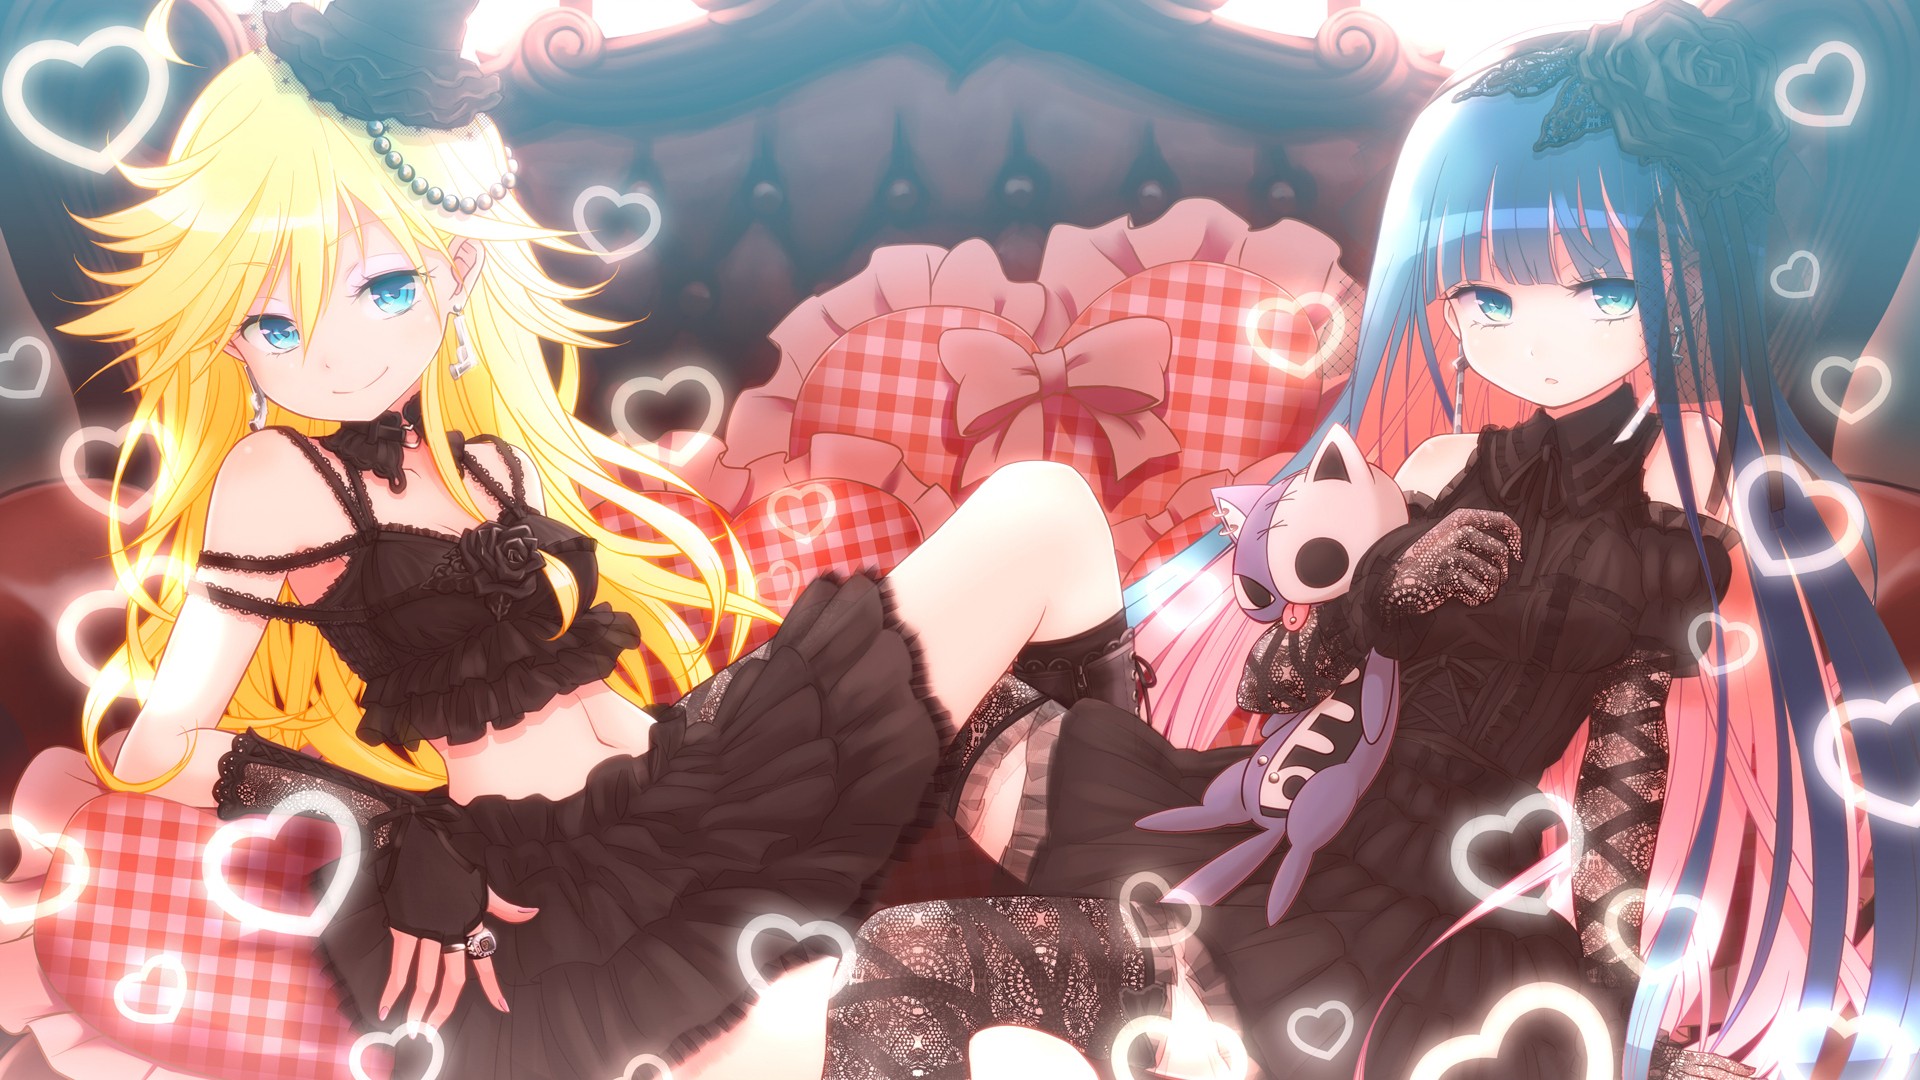 Anime Anime Girls Panty And Stocking With Garterbelt Anarchy Panty Anarchy Stocking Blonde Long Hair 1920x1080